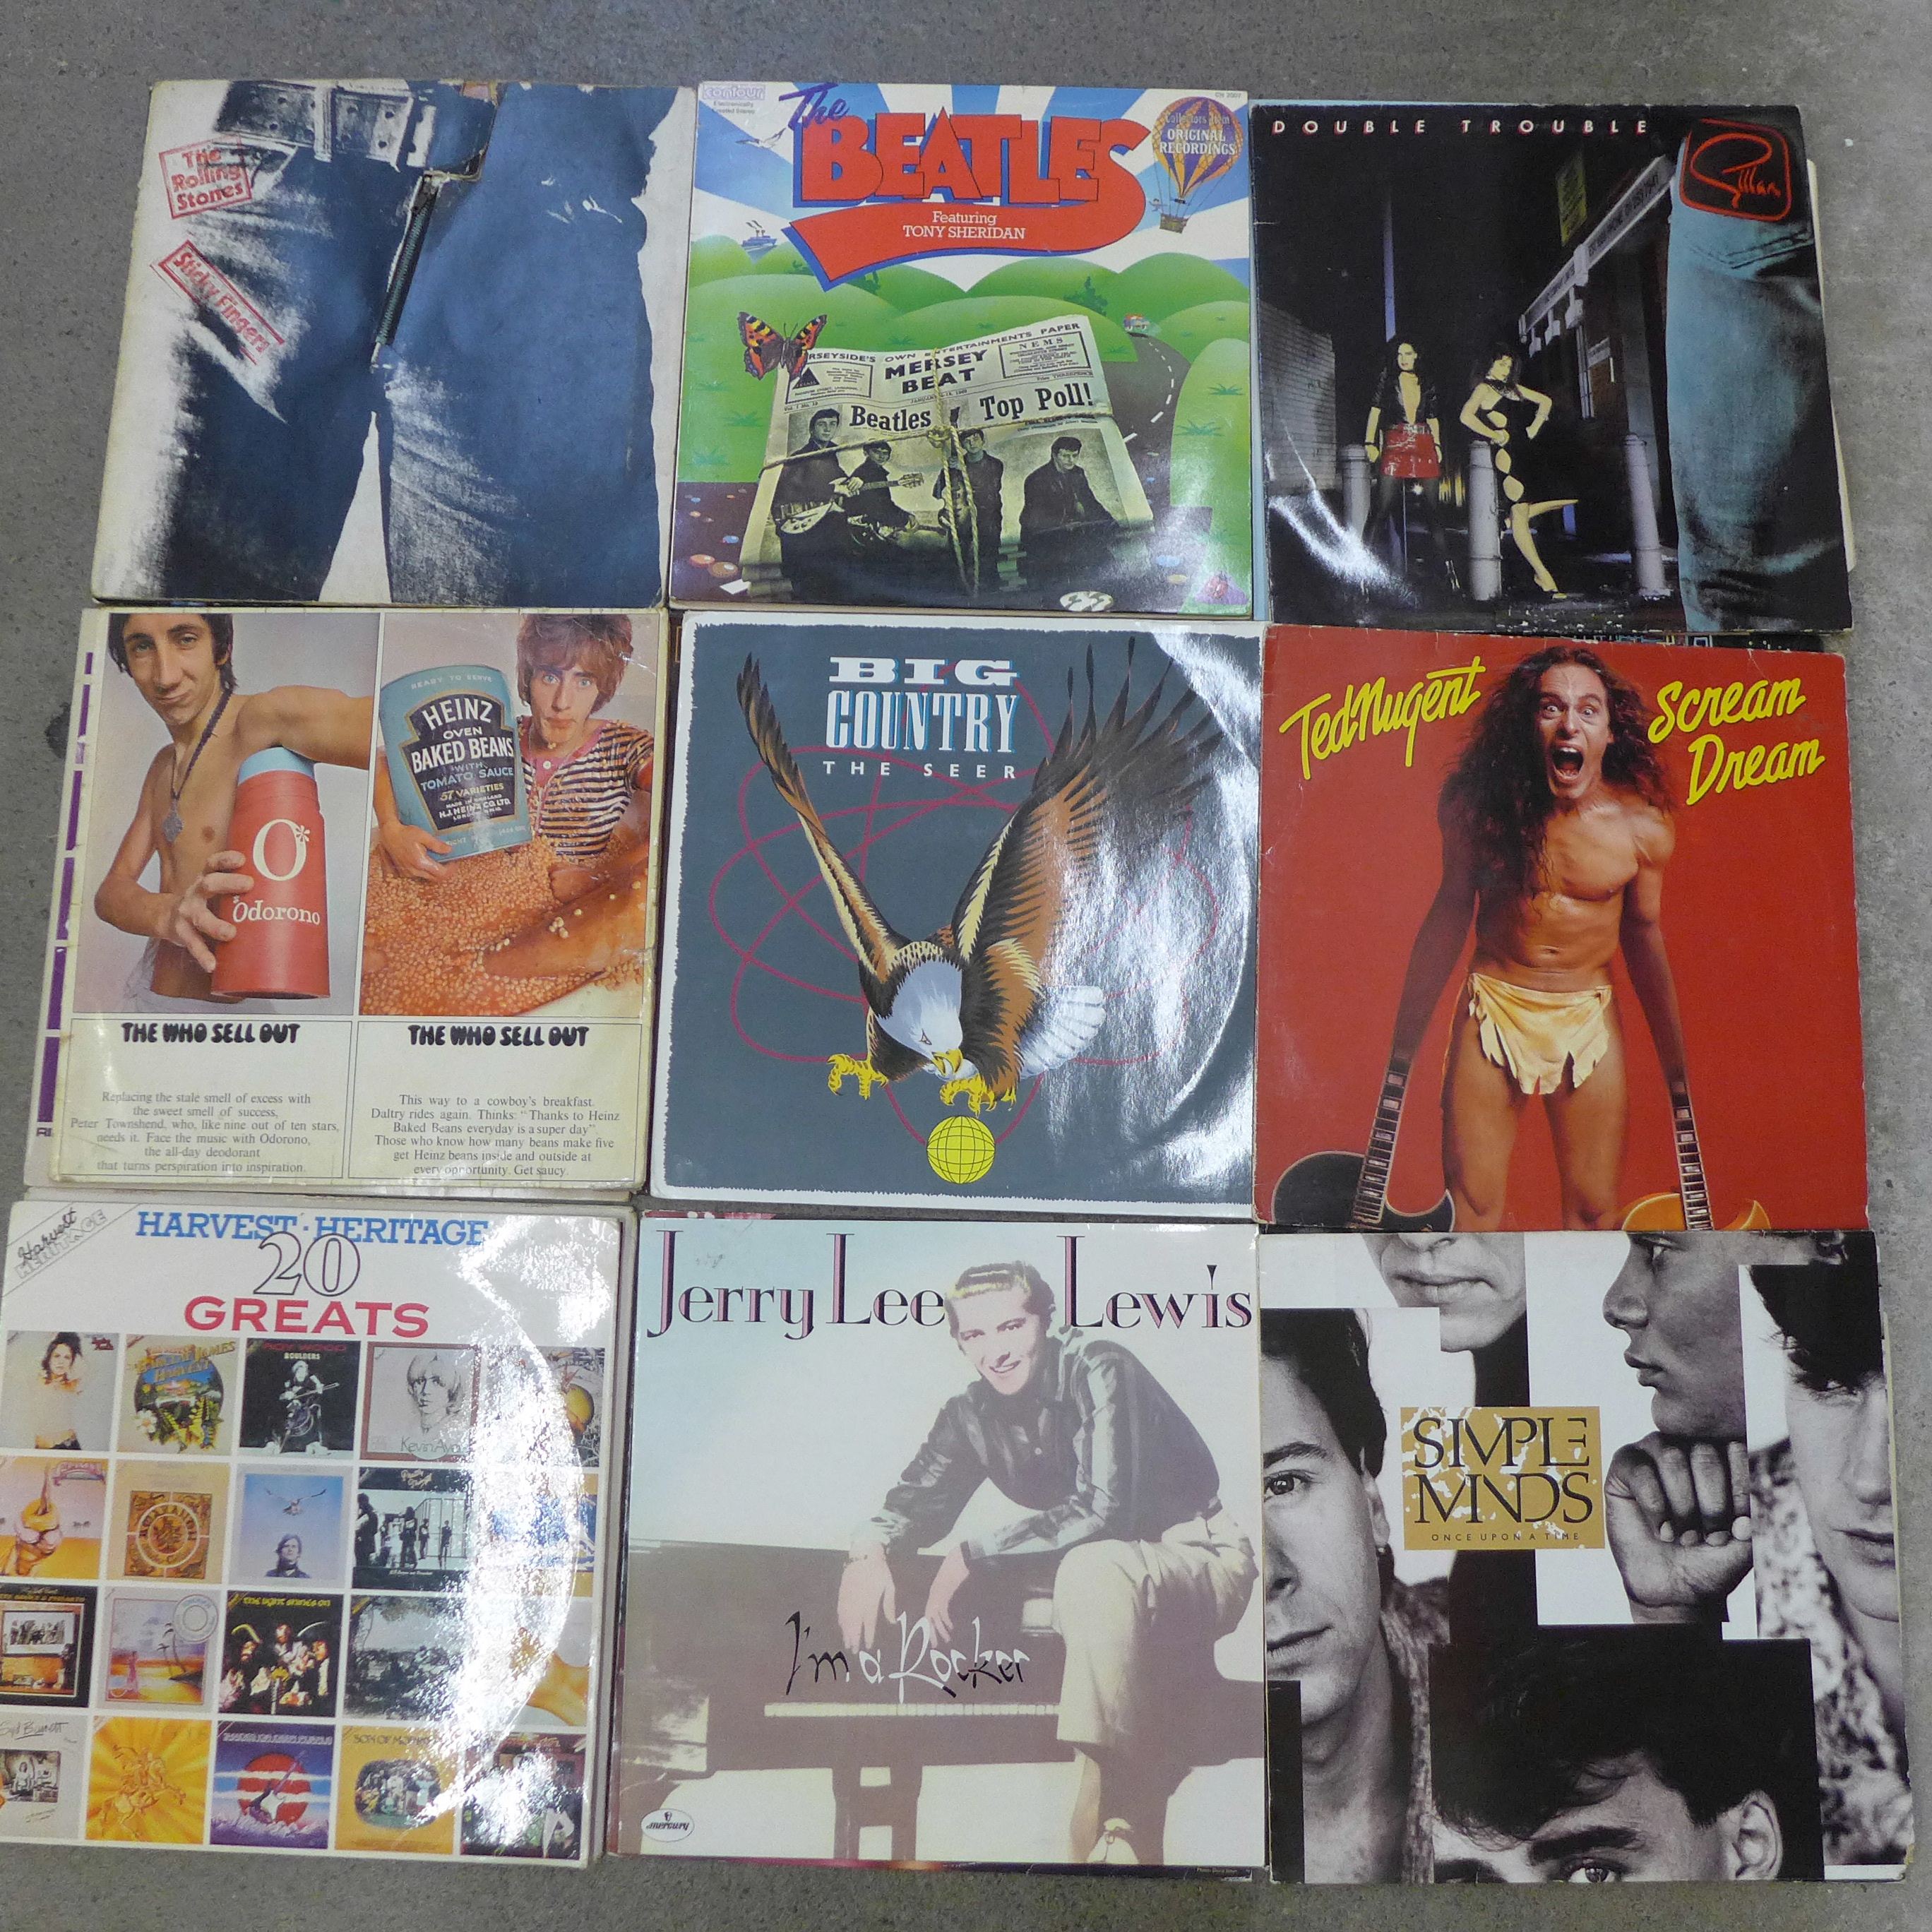 Eighteen LP records including Deep Purple, The Who and The Rolling Stones, (Sticky Fingers zip - Image 2 of 2